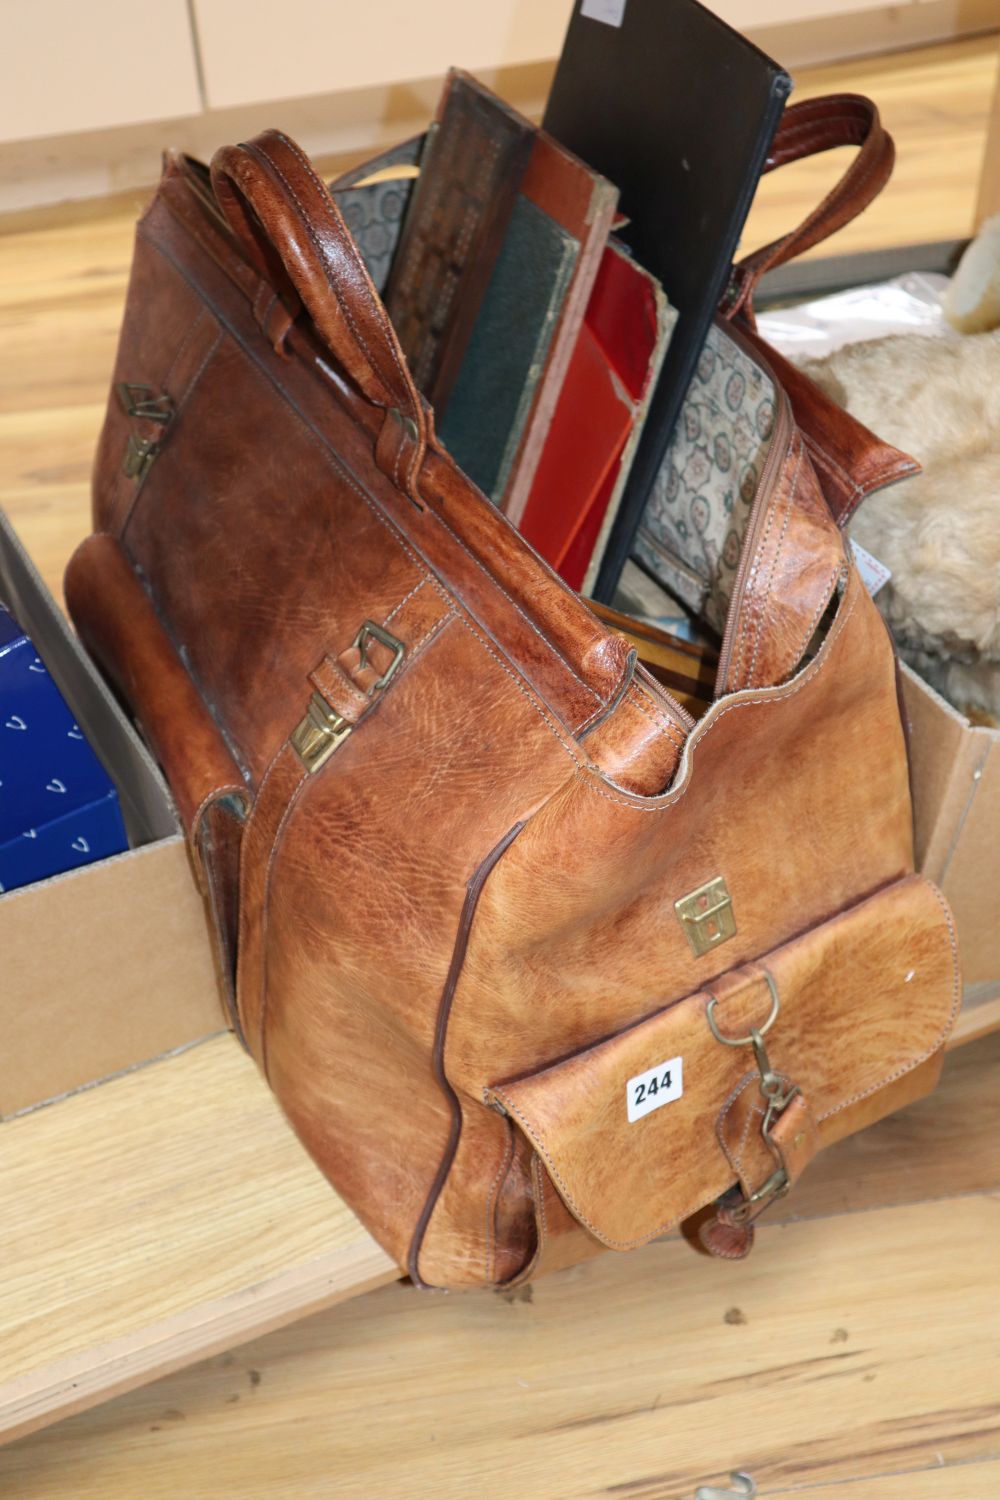 A quantity of board games, cards, shakes and a collection of cribbage boards in a large Gladstone-style bag